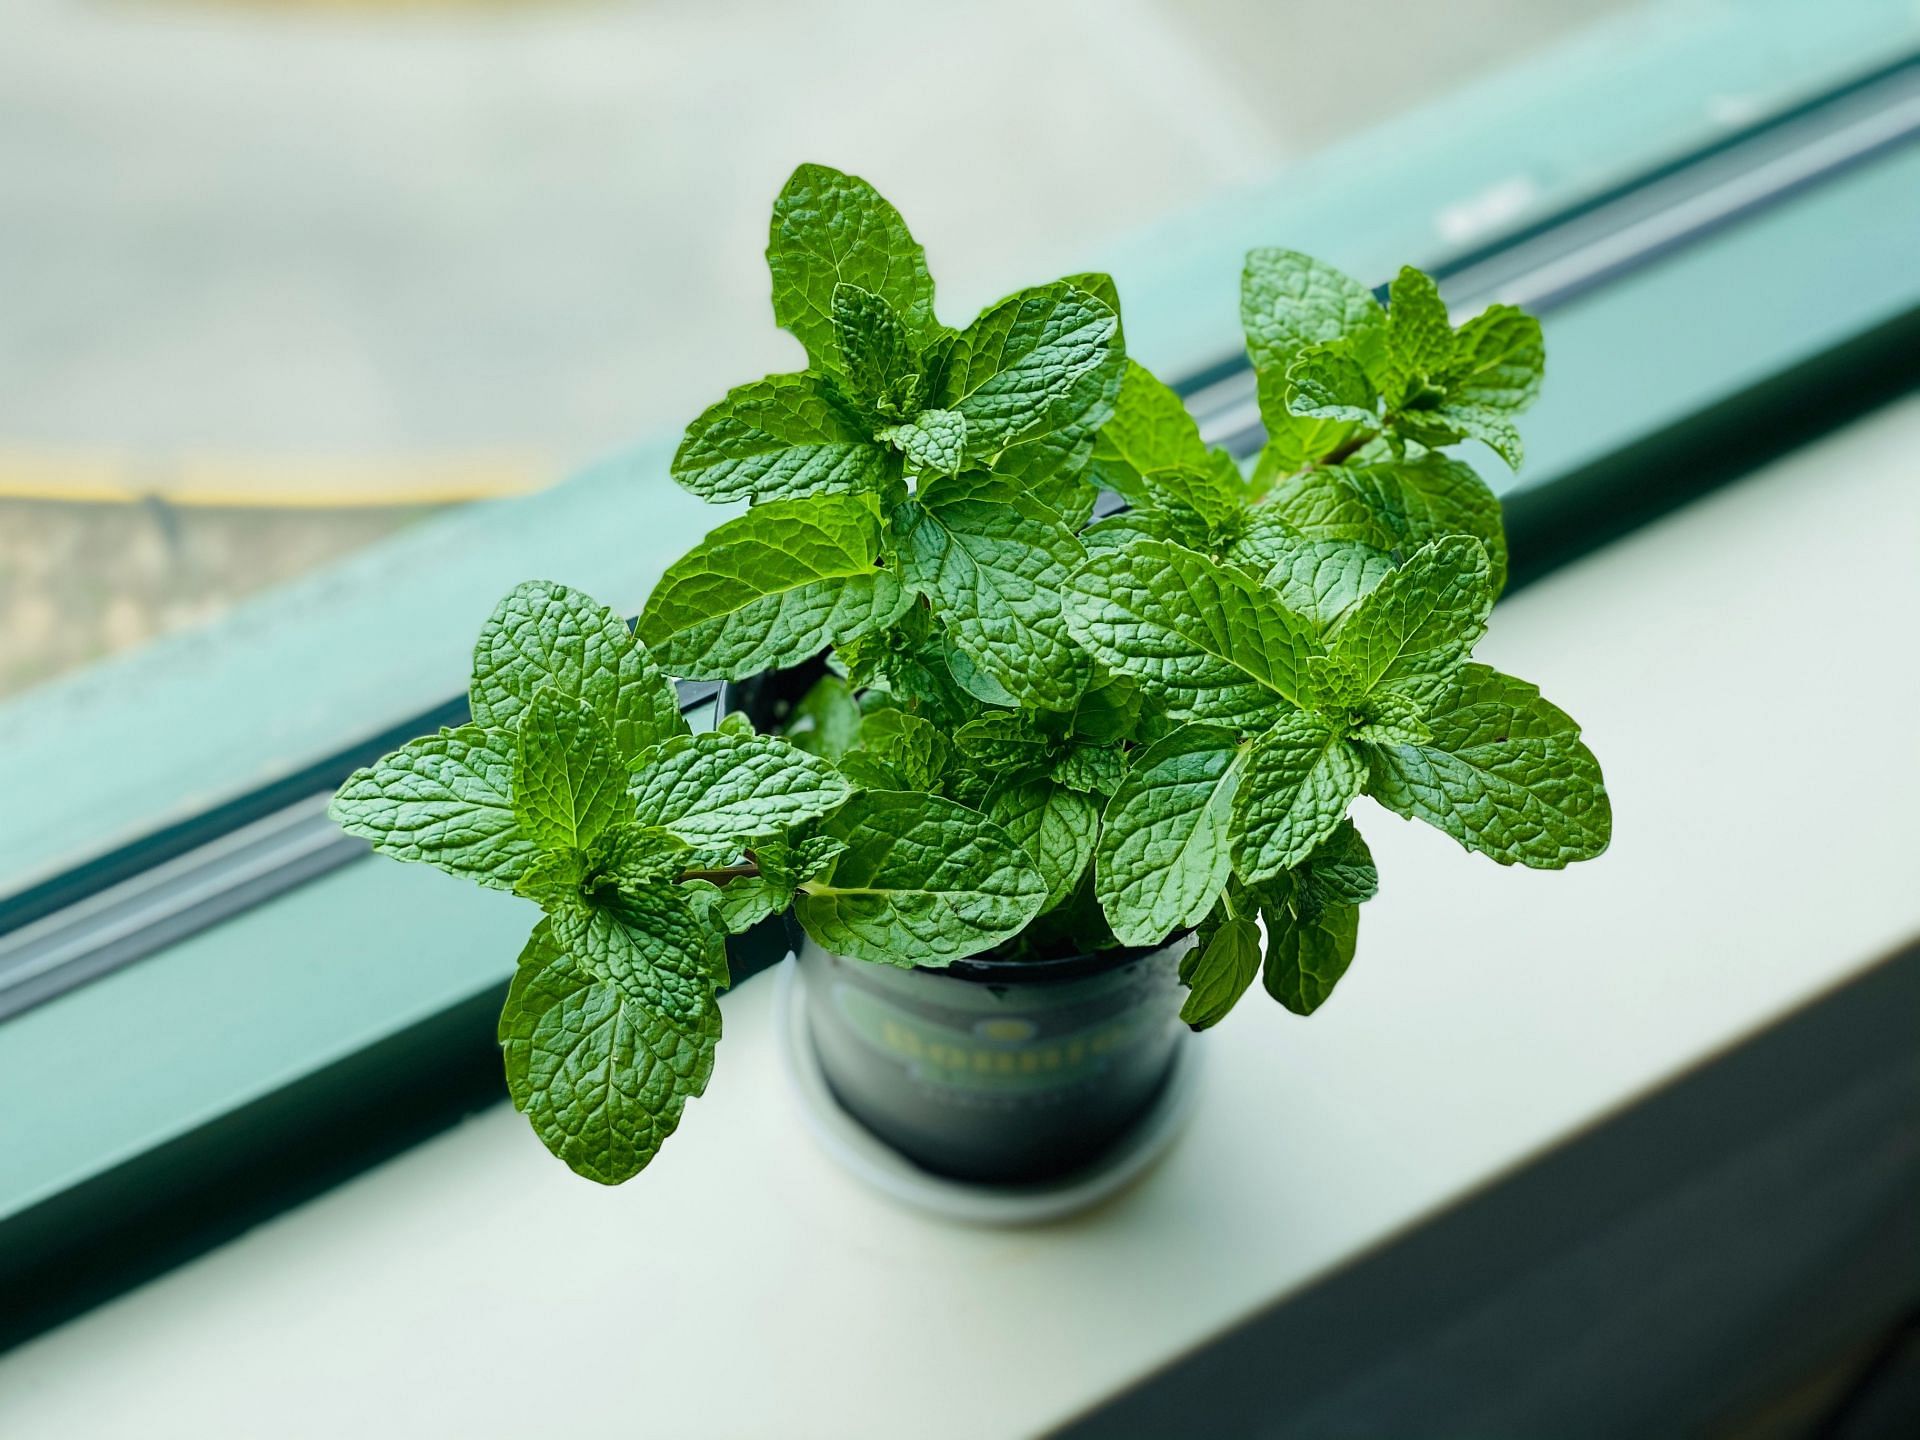 Mint can also be used to treat acne. (Image via Unsplash/ Eleanor Chen)